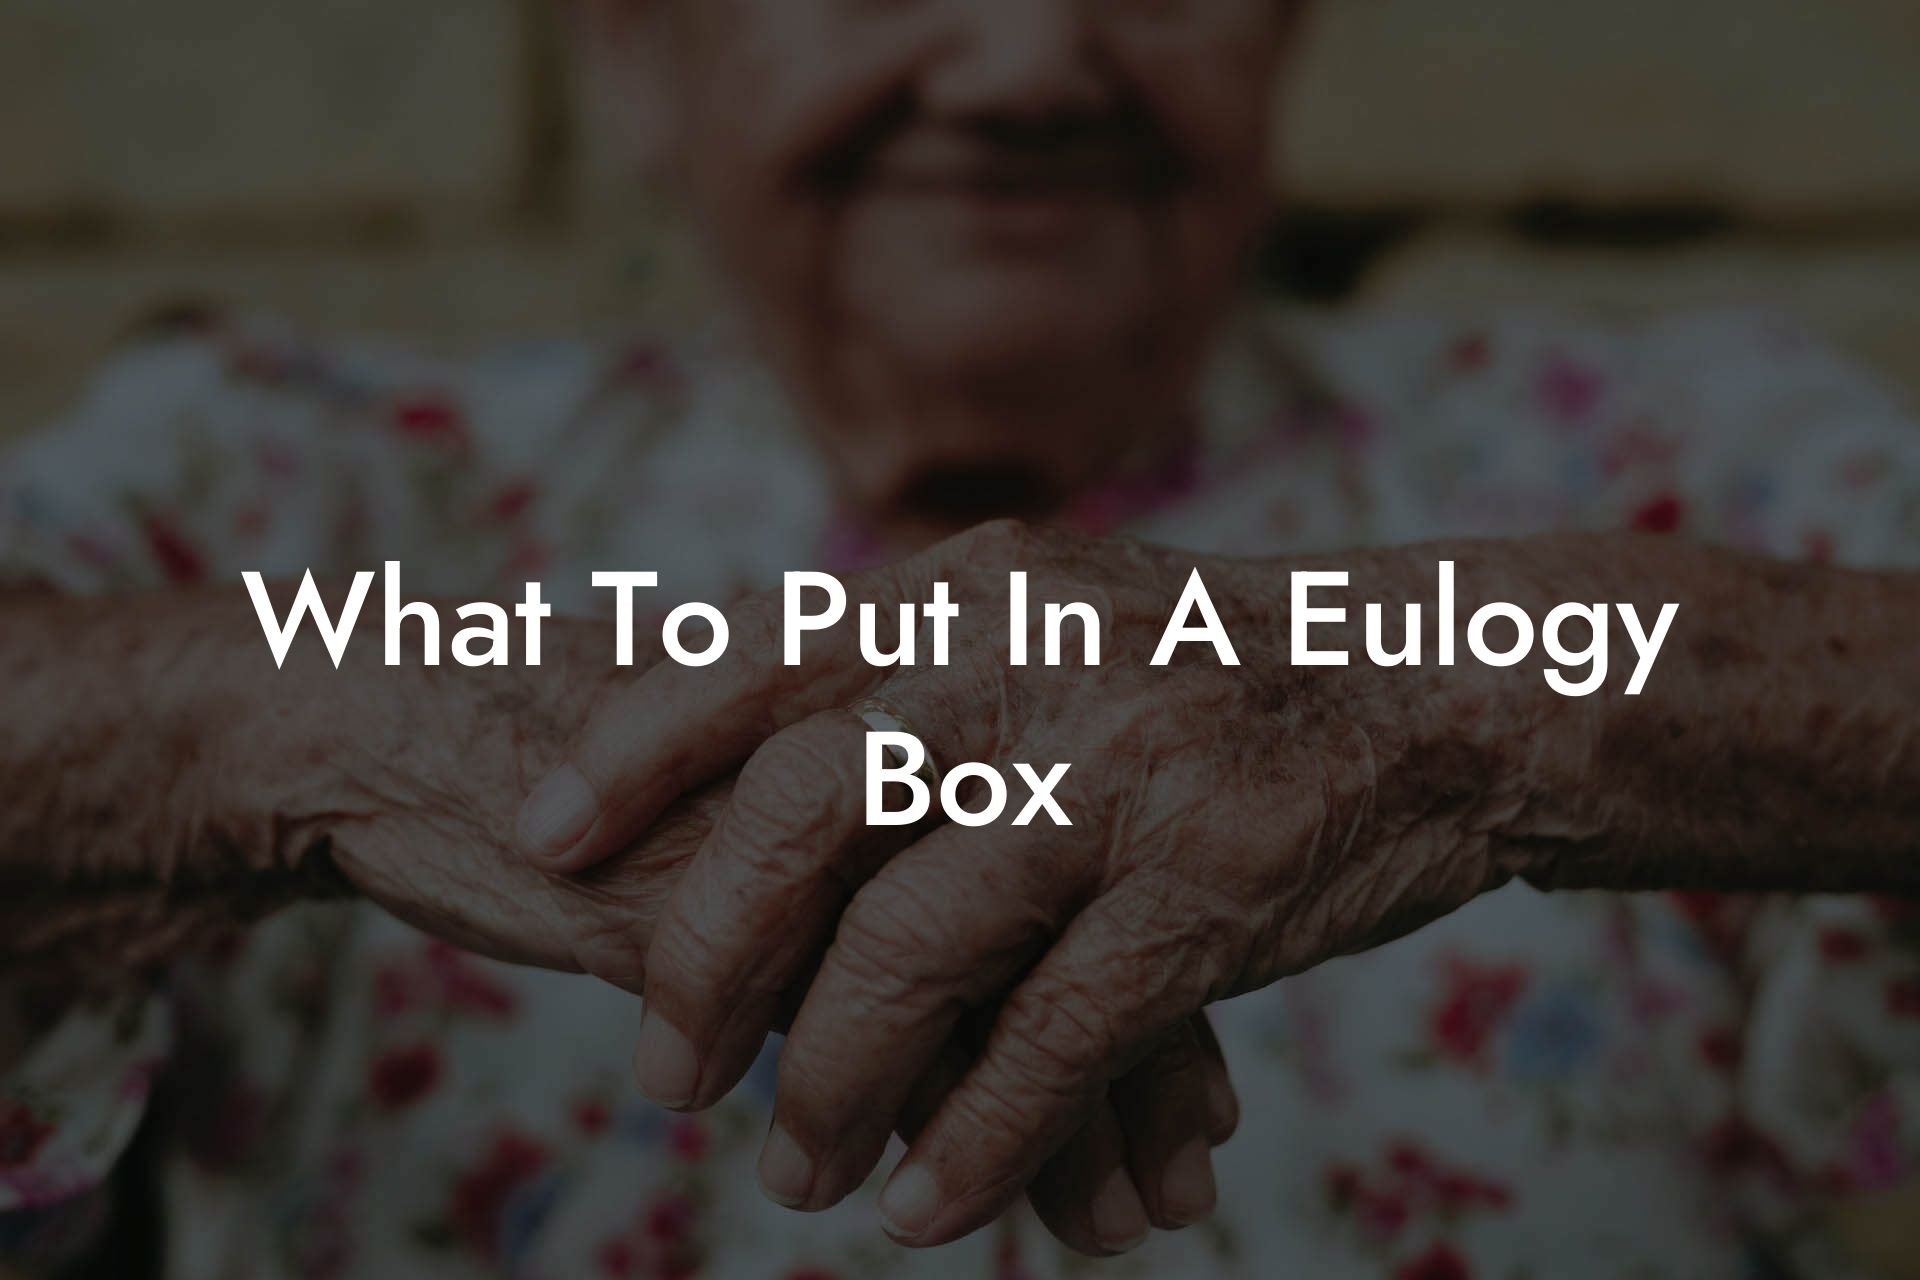 What To Put In A Eulogy Box